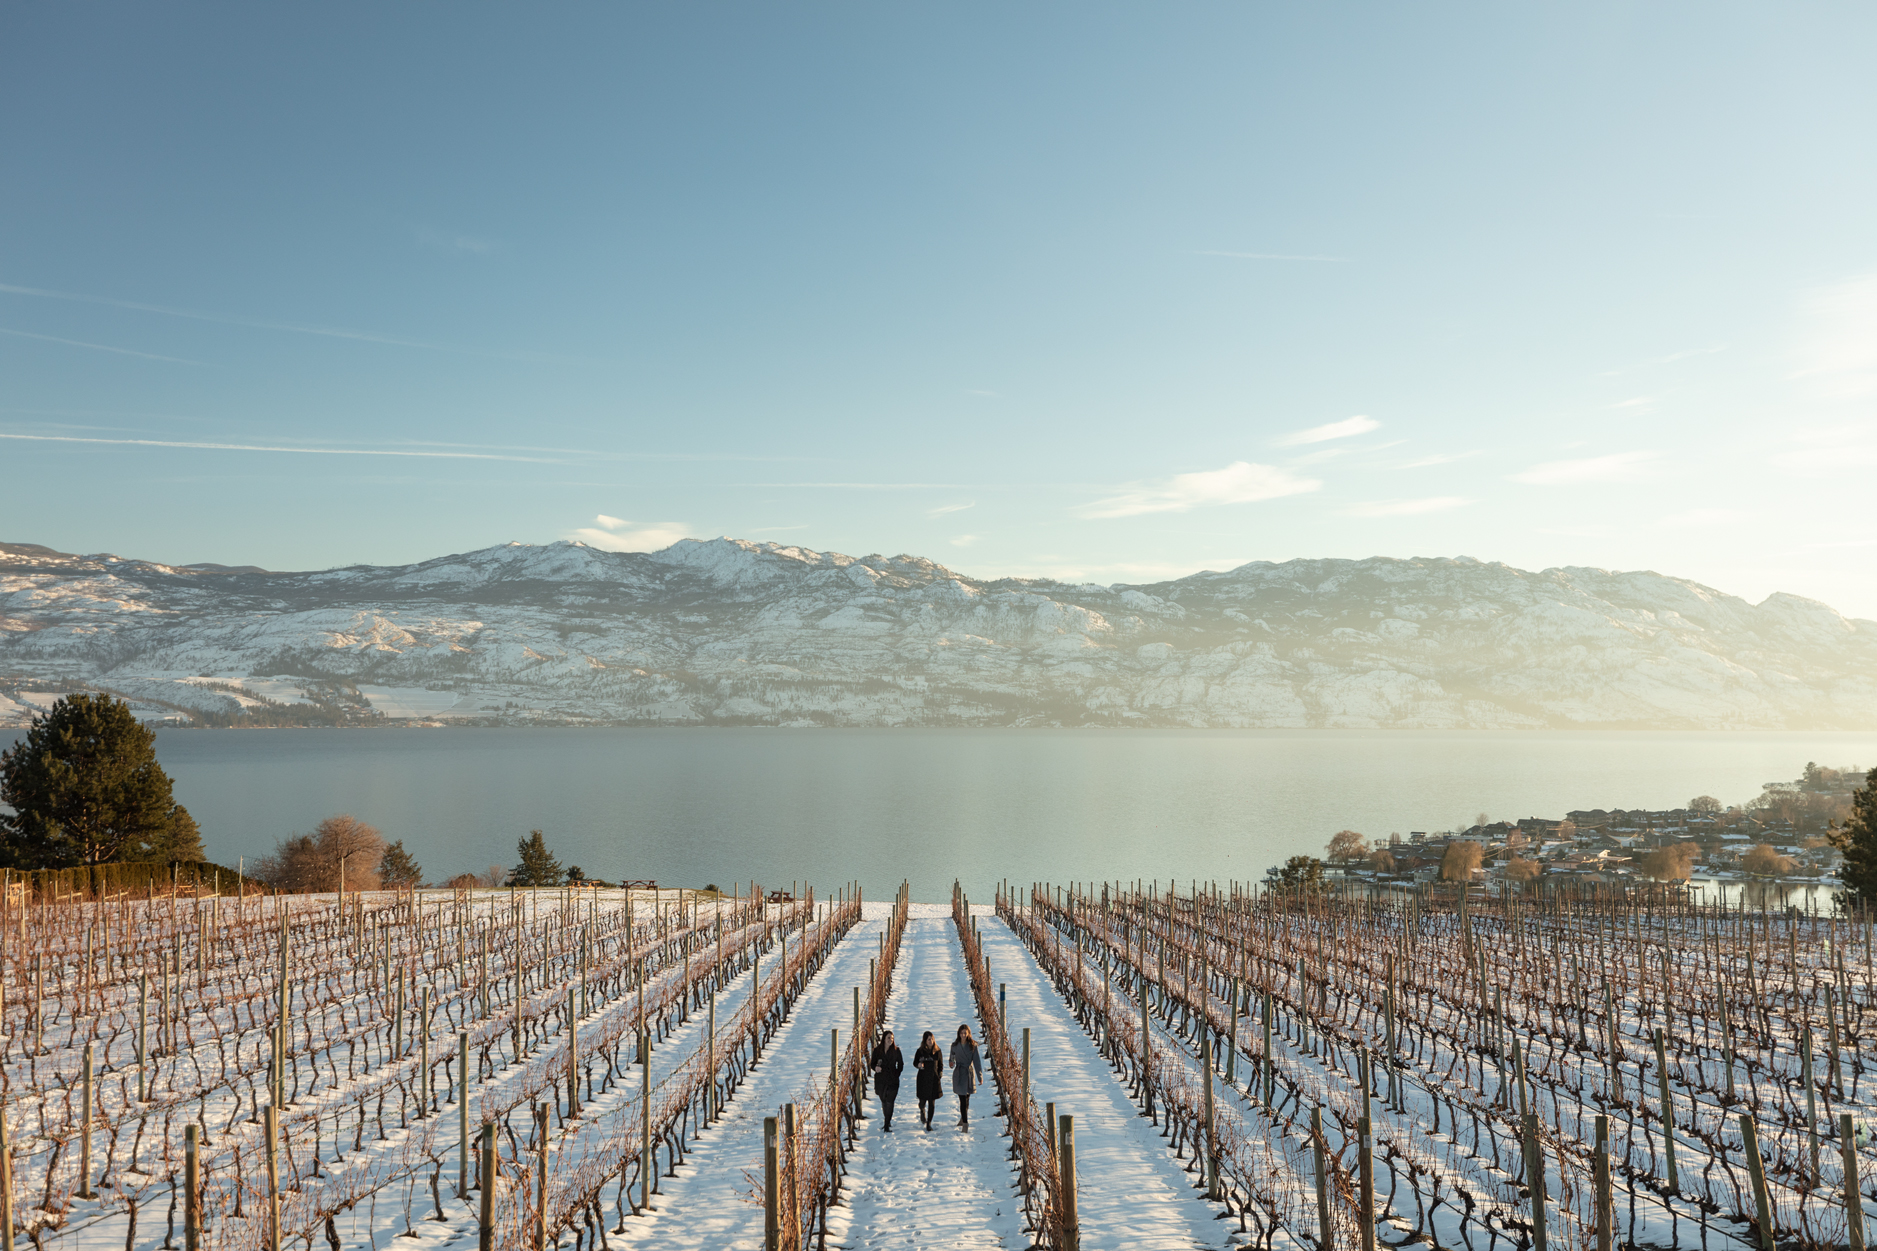 Three people walk through the vineyards in the snow at Quails' Gate Winery